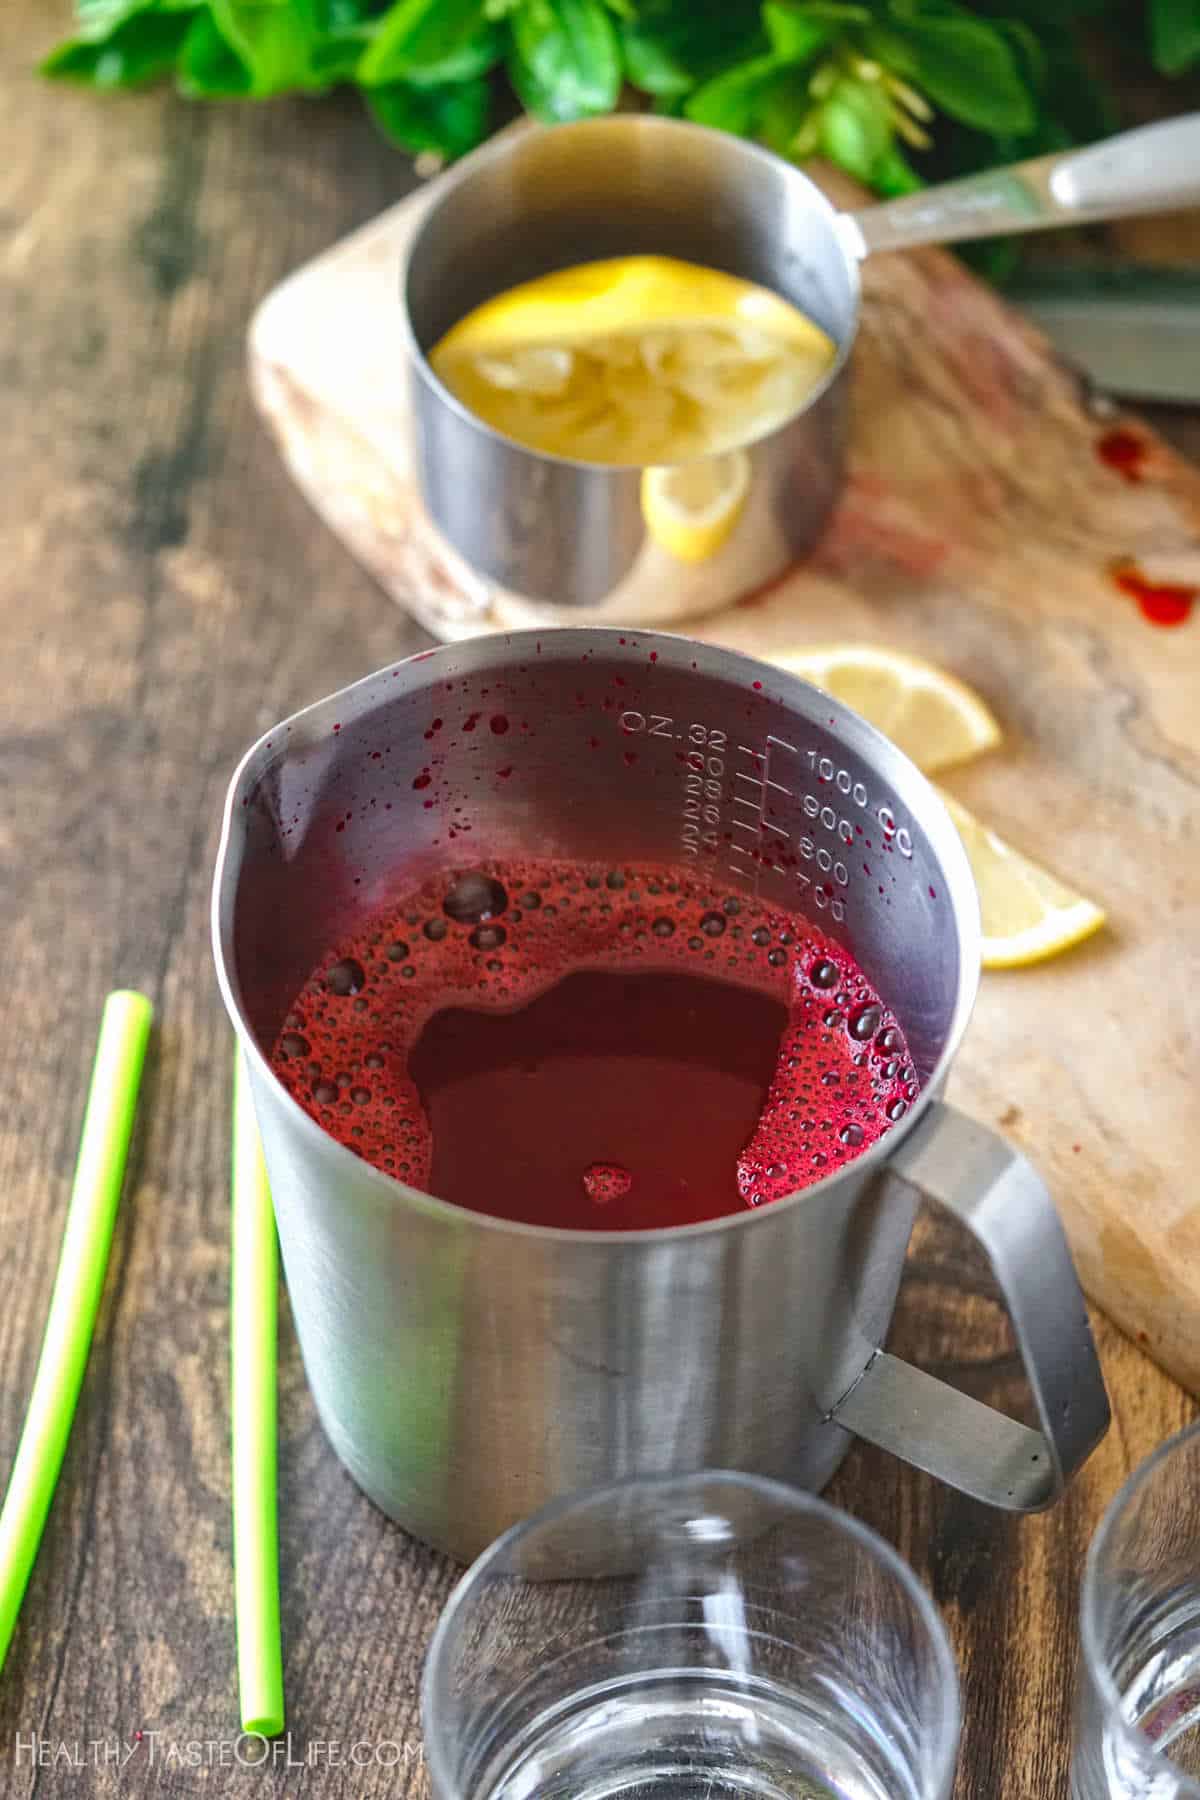 Freshly squeezed beet juice with apple and carrots in a container.